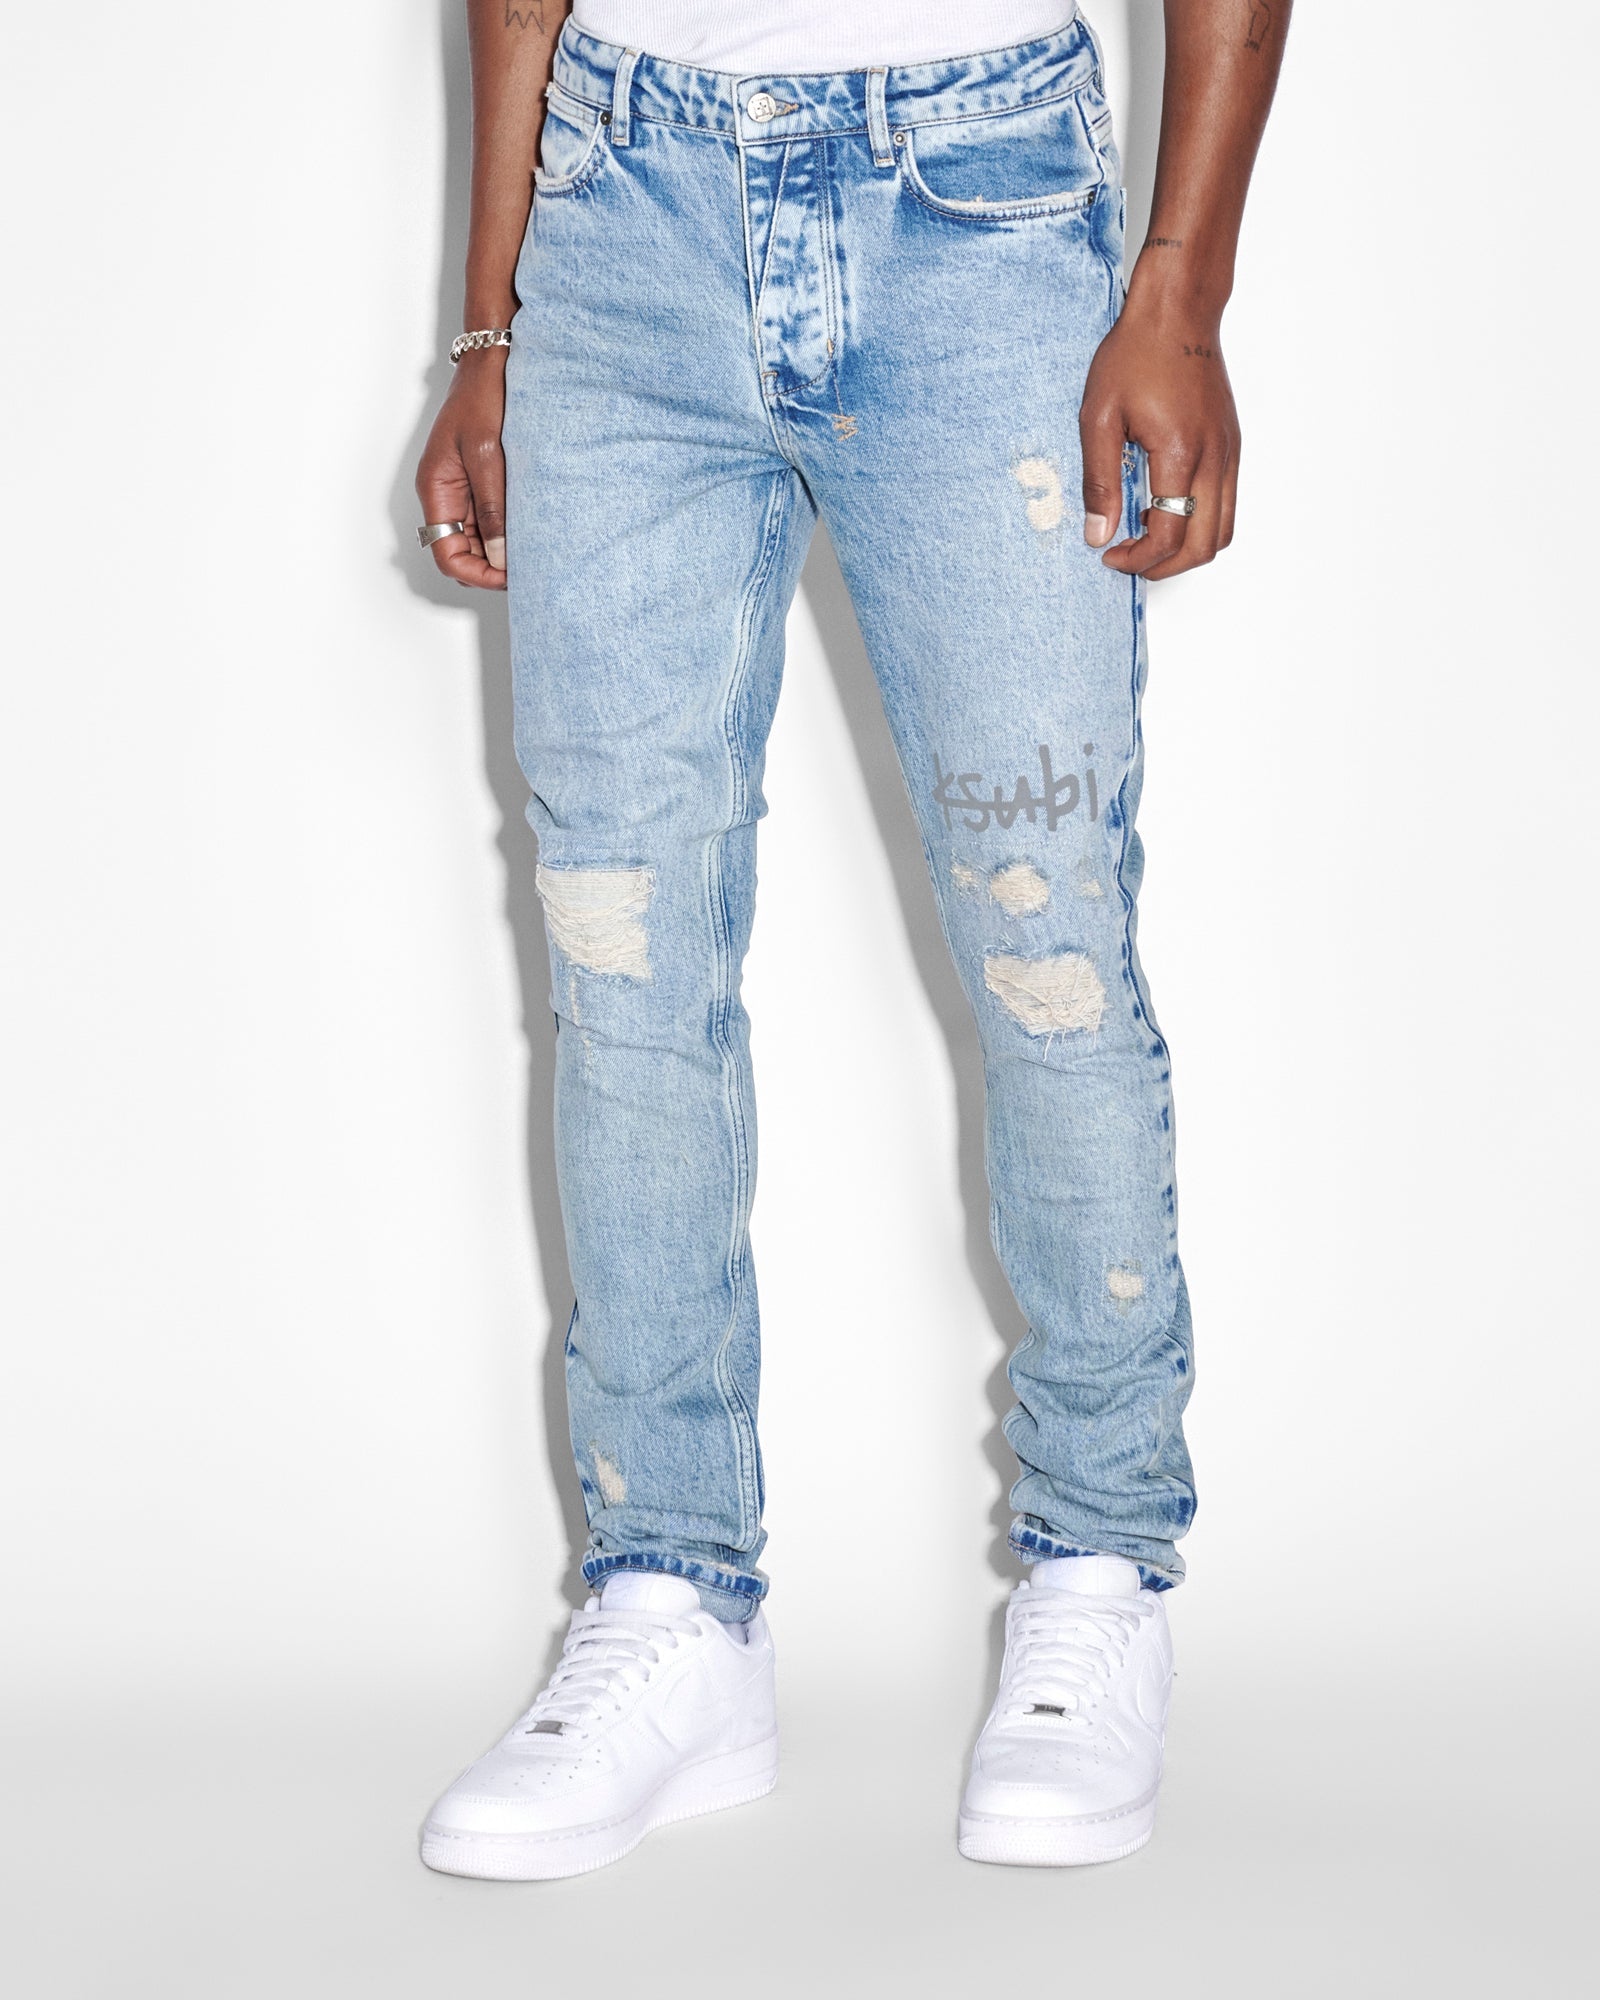 Manfinity EMRG Men Solid Ripped Jeans | SHEIN USA